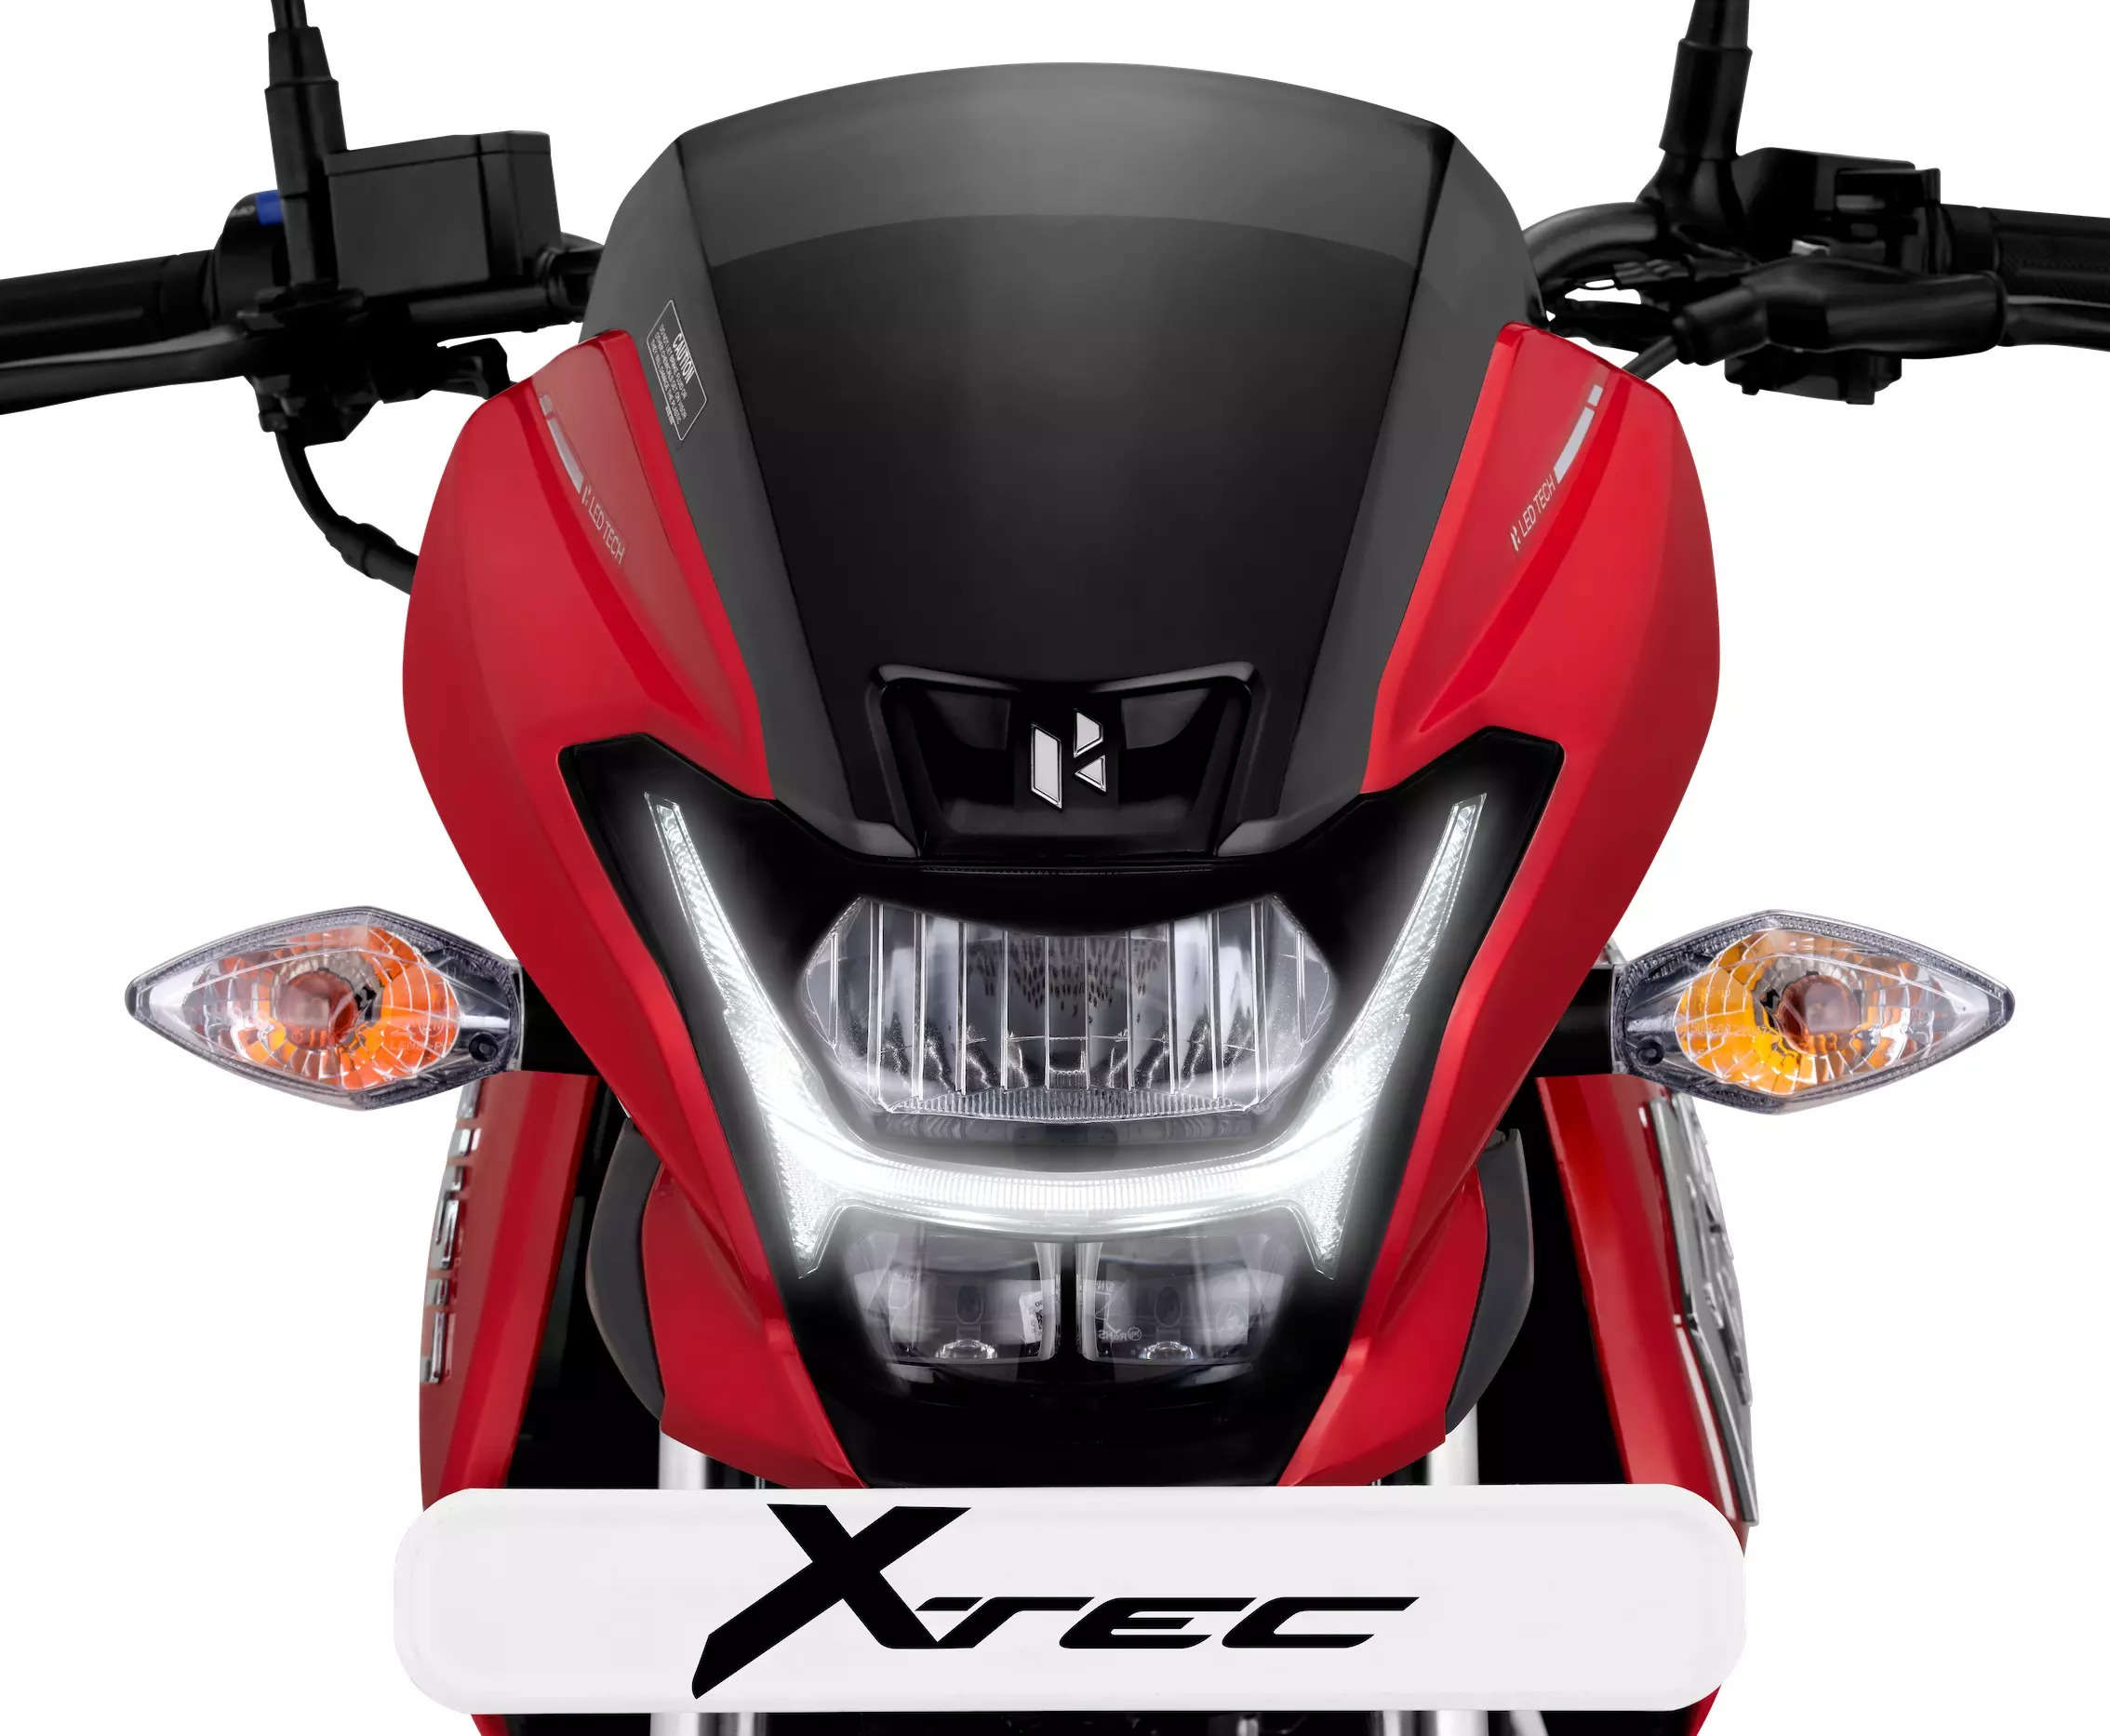 Hero MotoCorp Launches Passion Xtec Motorcycle;  price starts at INR 74,590